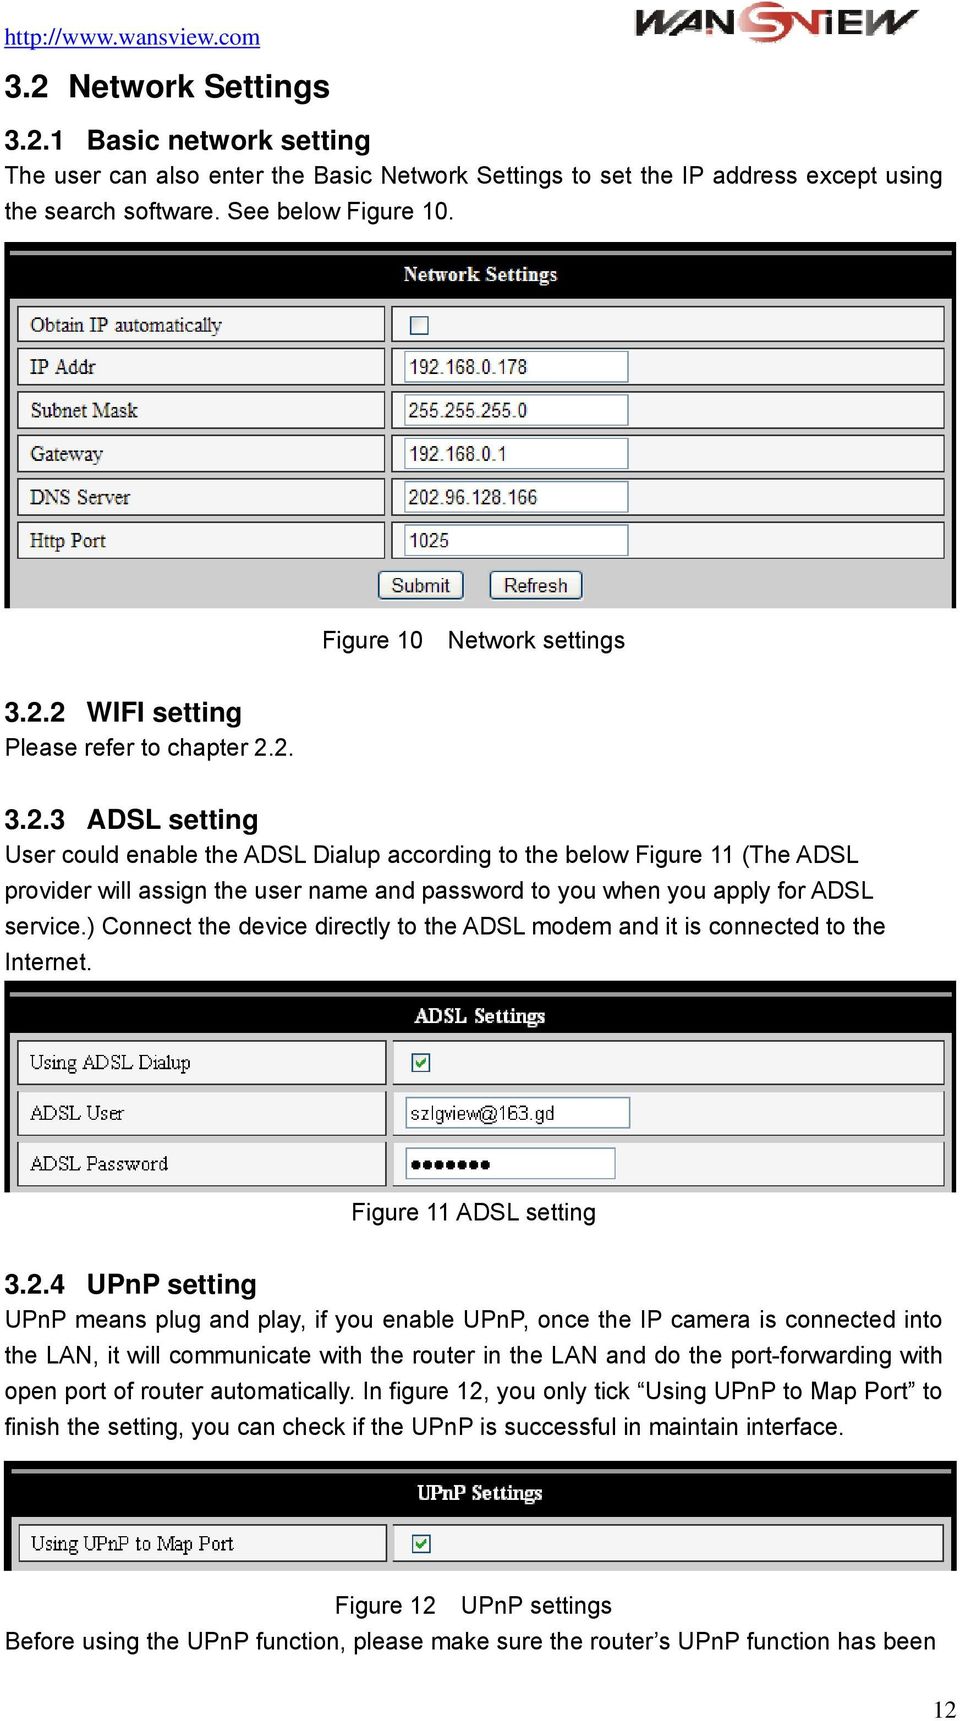 2 WIFI setting Please refer to chapter 2.2. 3.2.3 ADSL setting User could enable the ADSL Dialup according to the below Figure 11 (The ADSL provider will assign the user name and password to you when you apply for ADSL service.